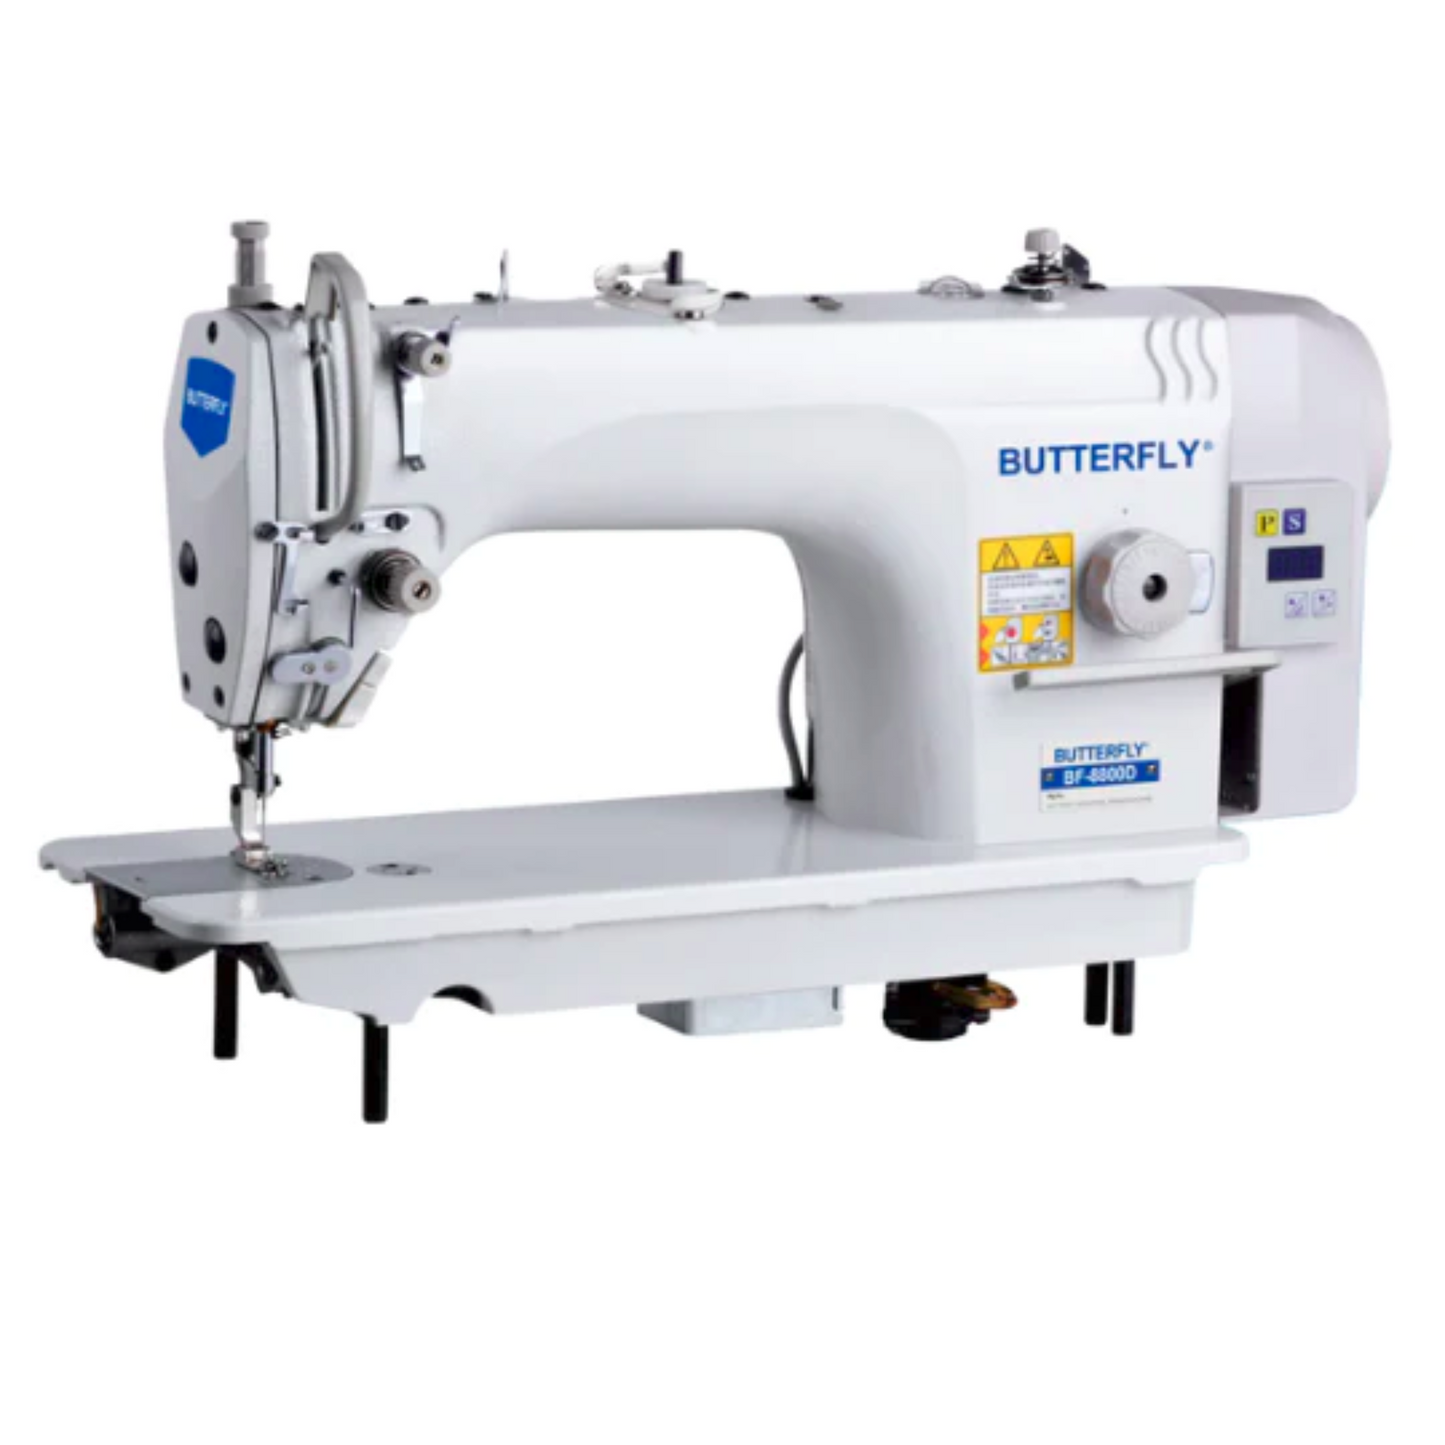 Butterfly BF 8800D - Sewing machine - Front view